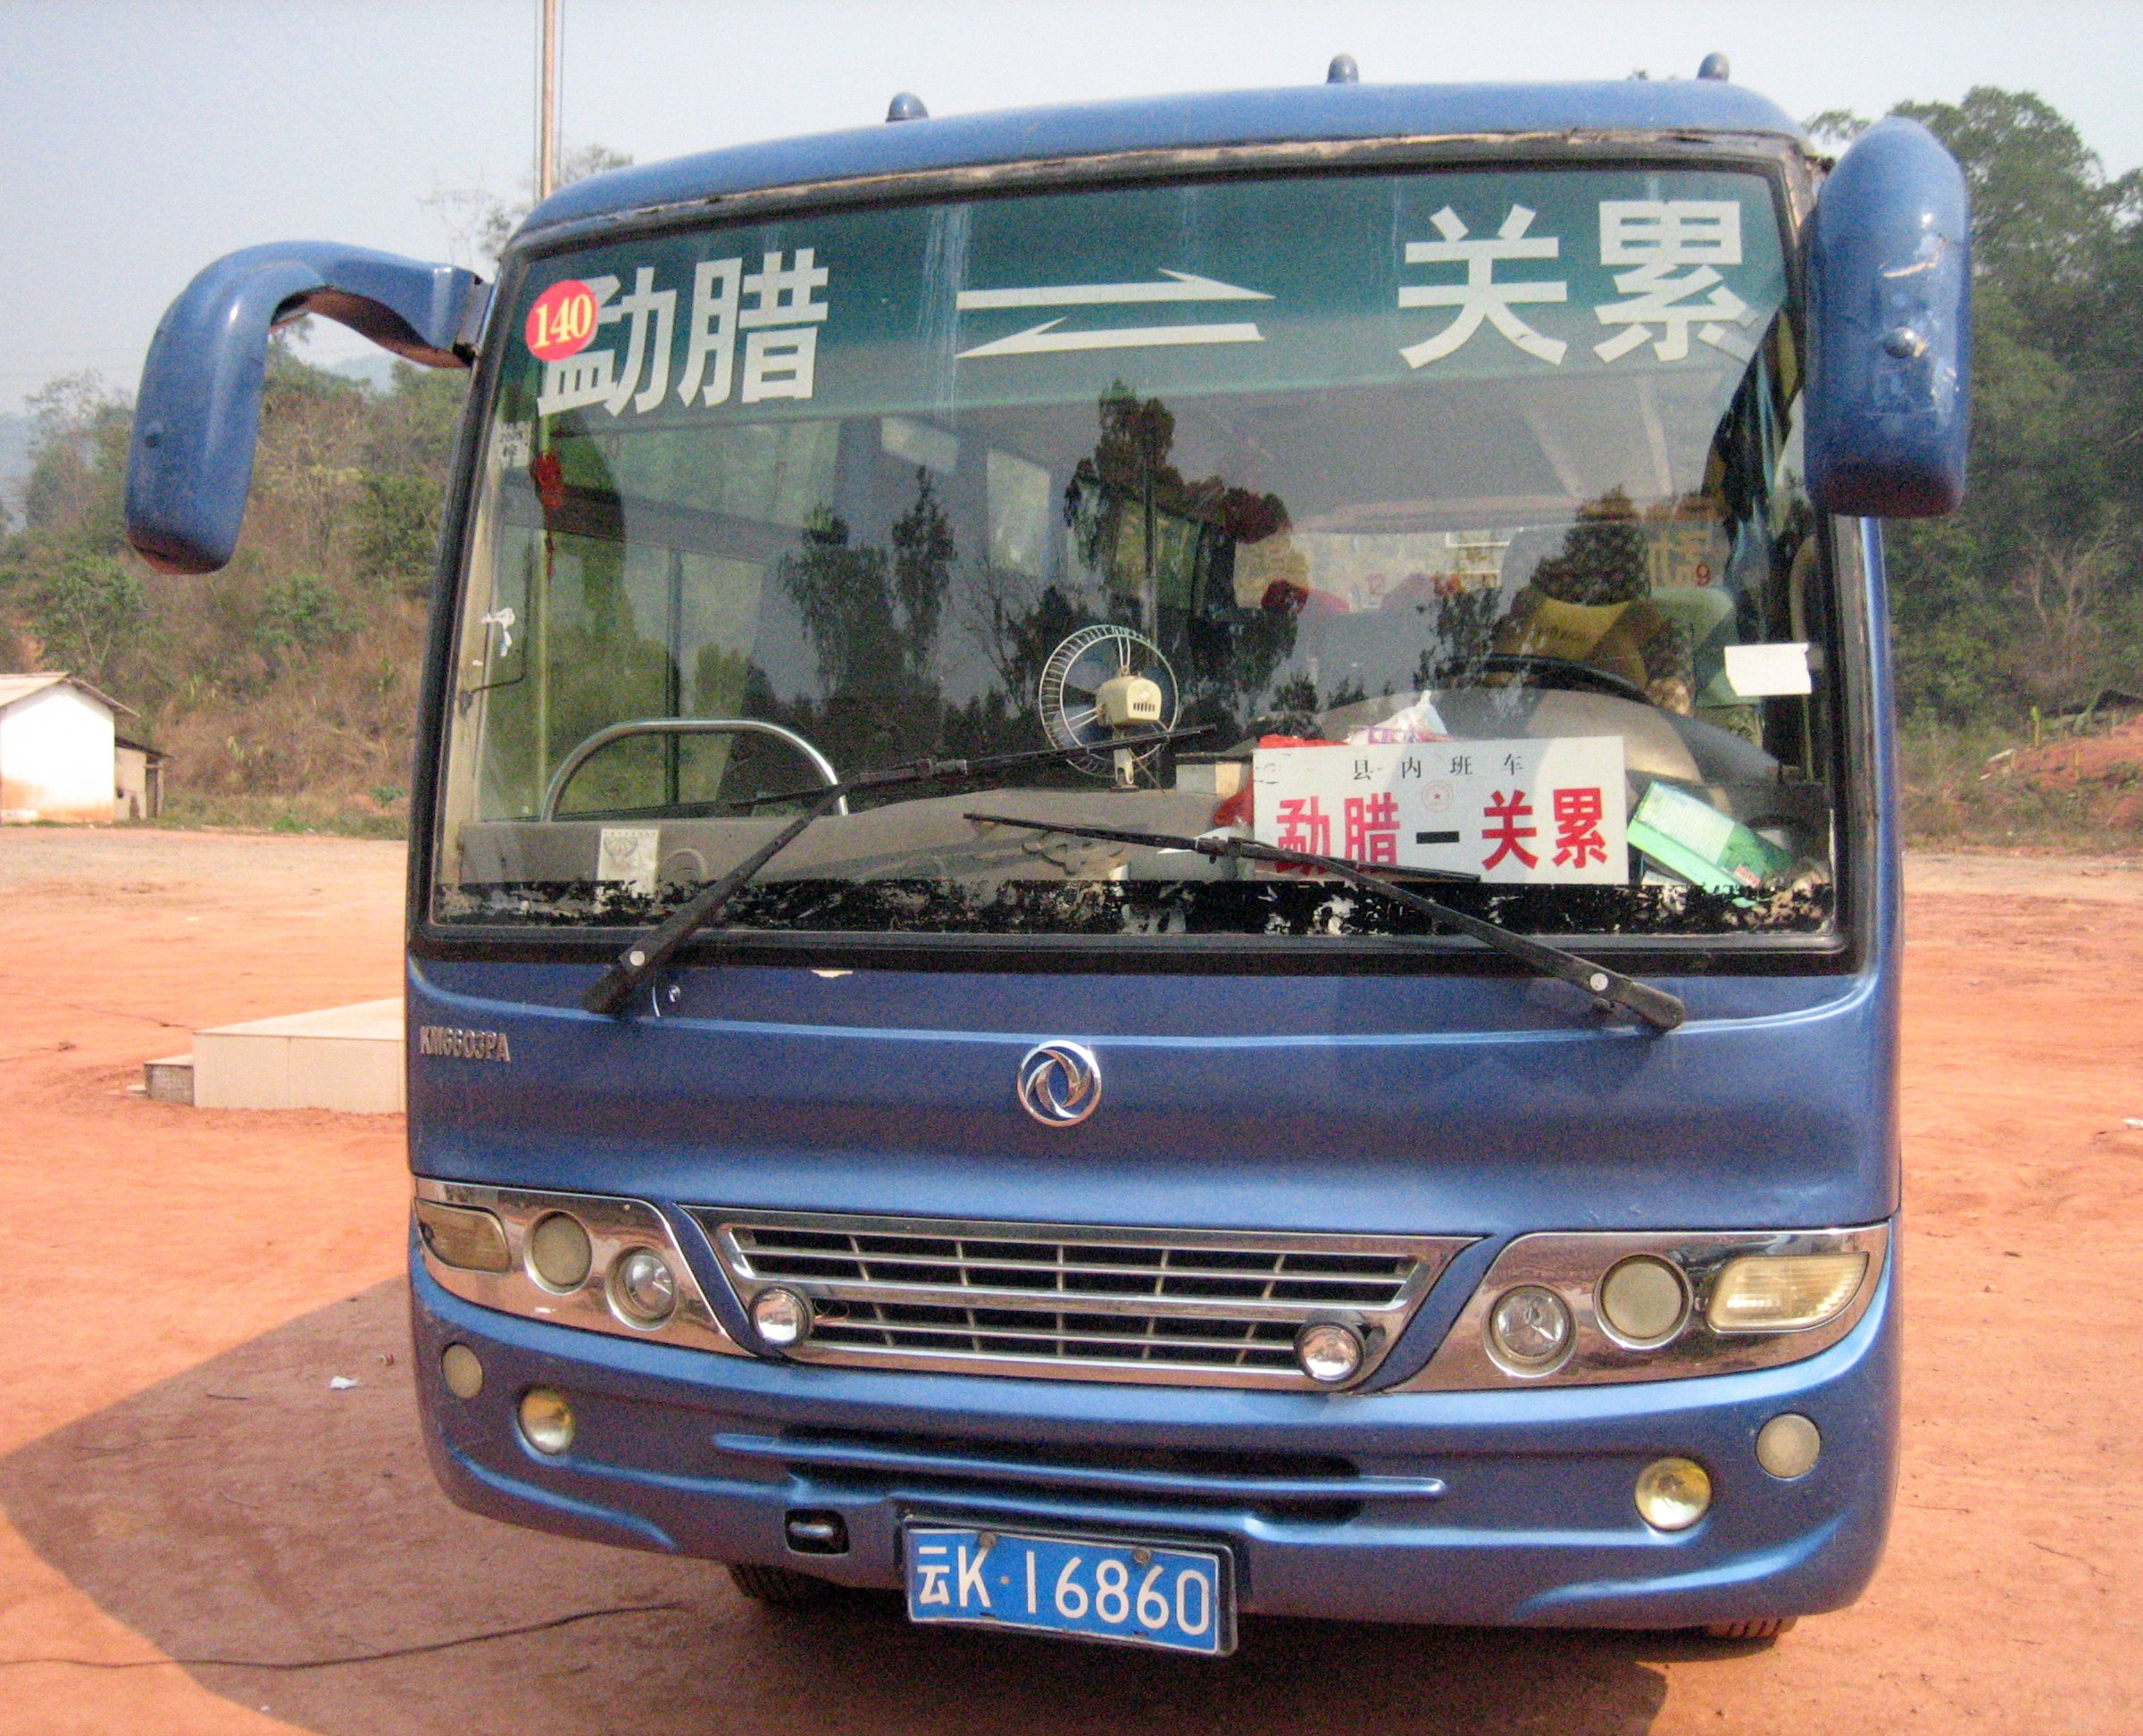 Dongfeng nissan diesel company #8